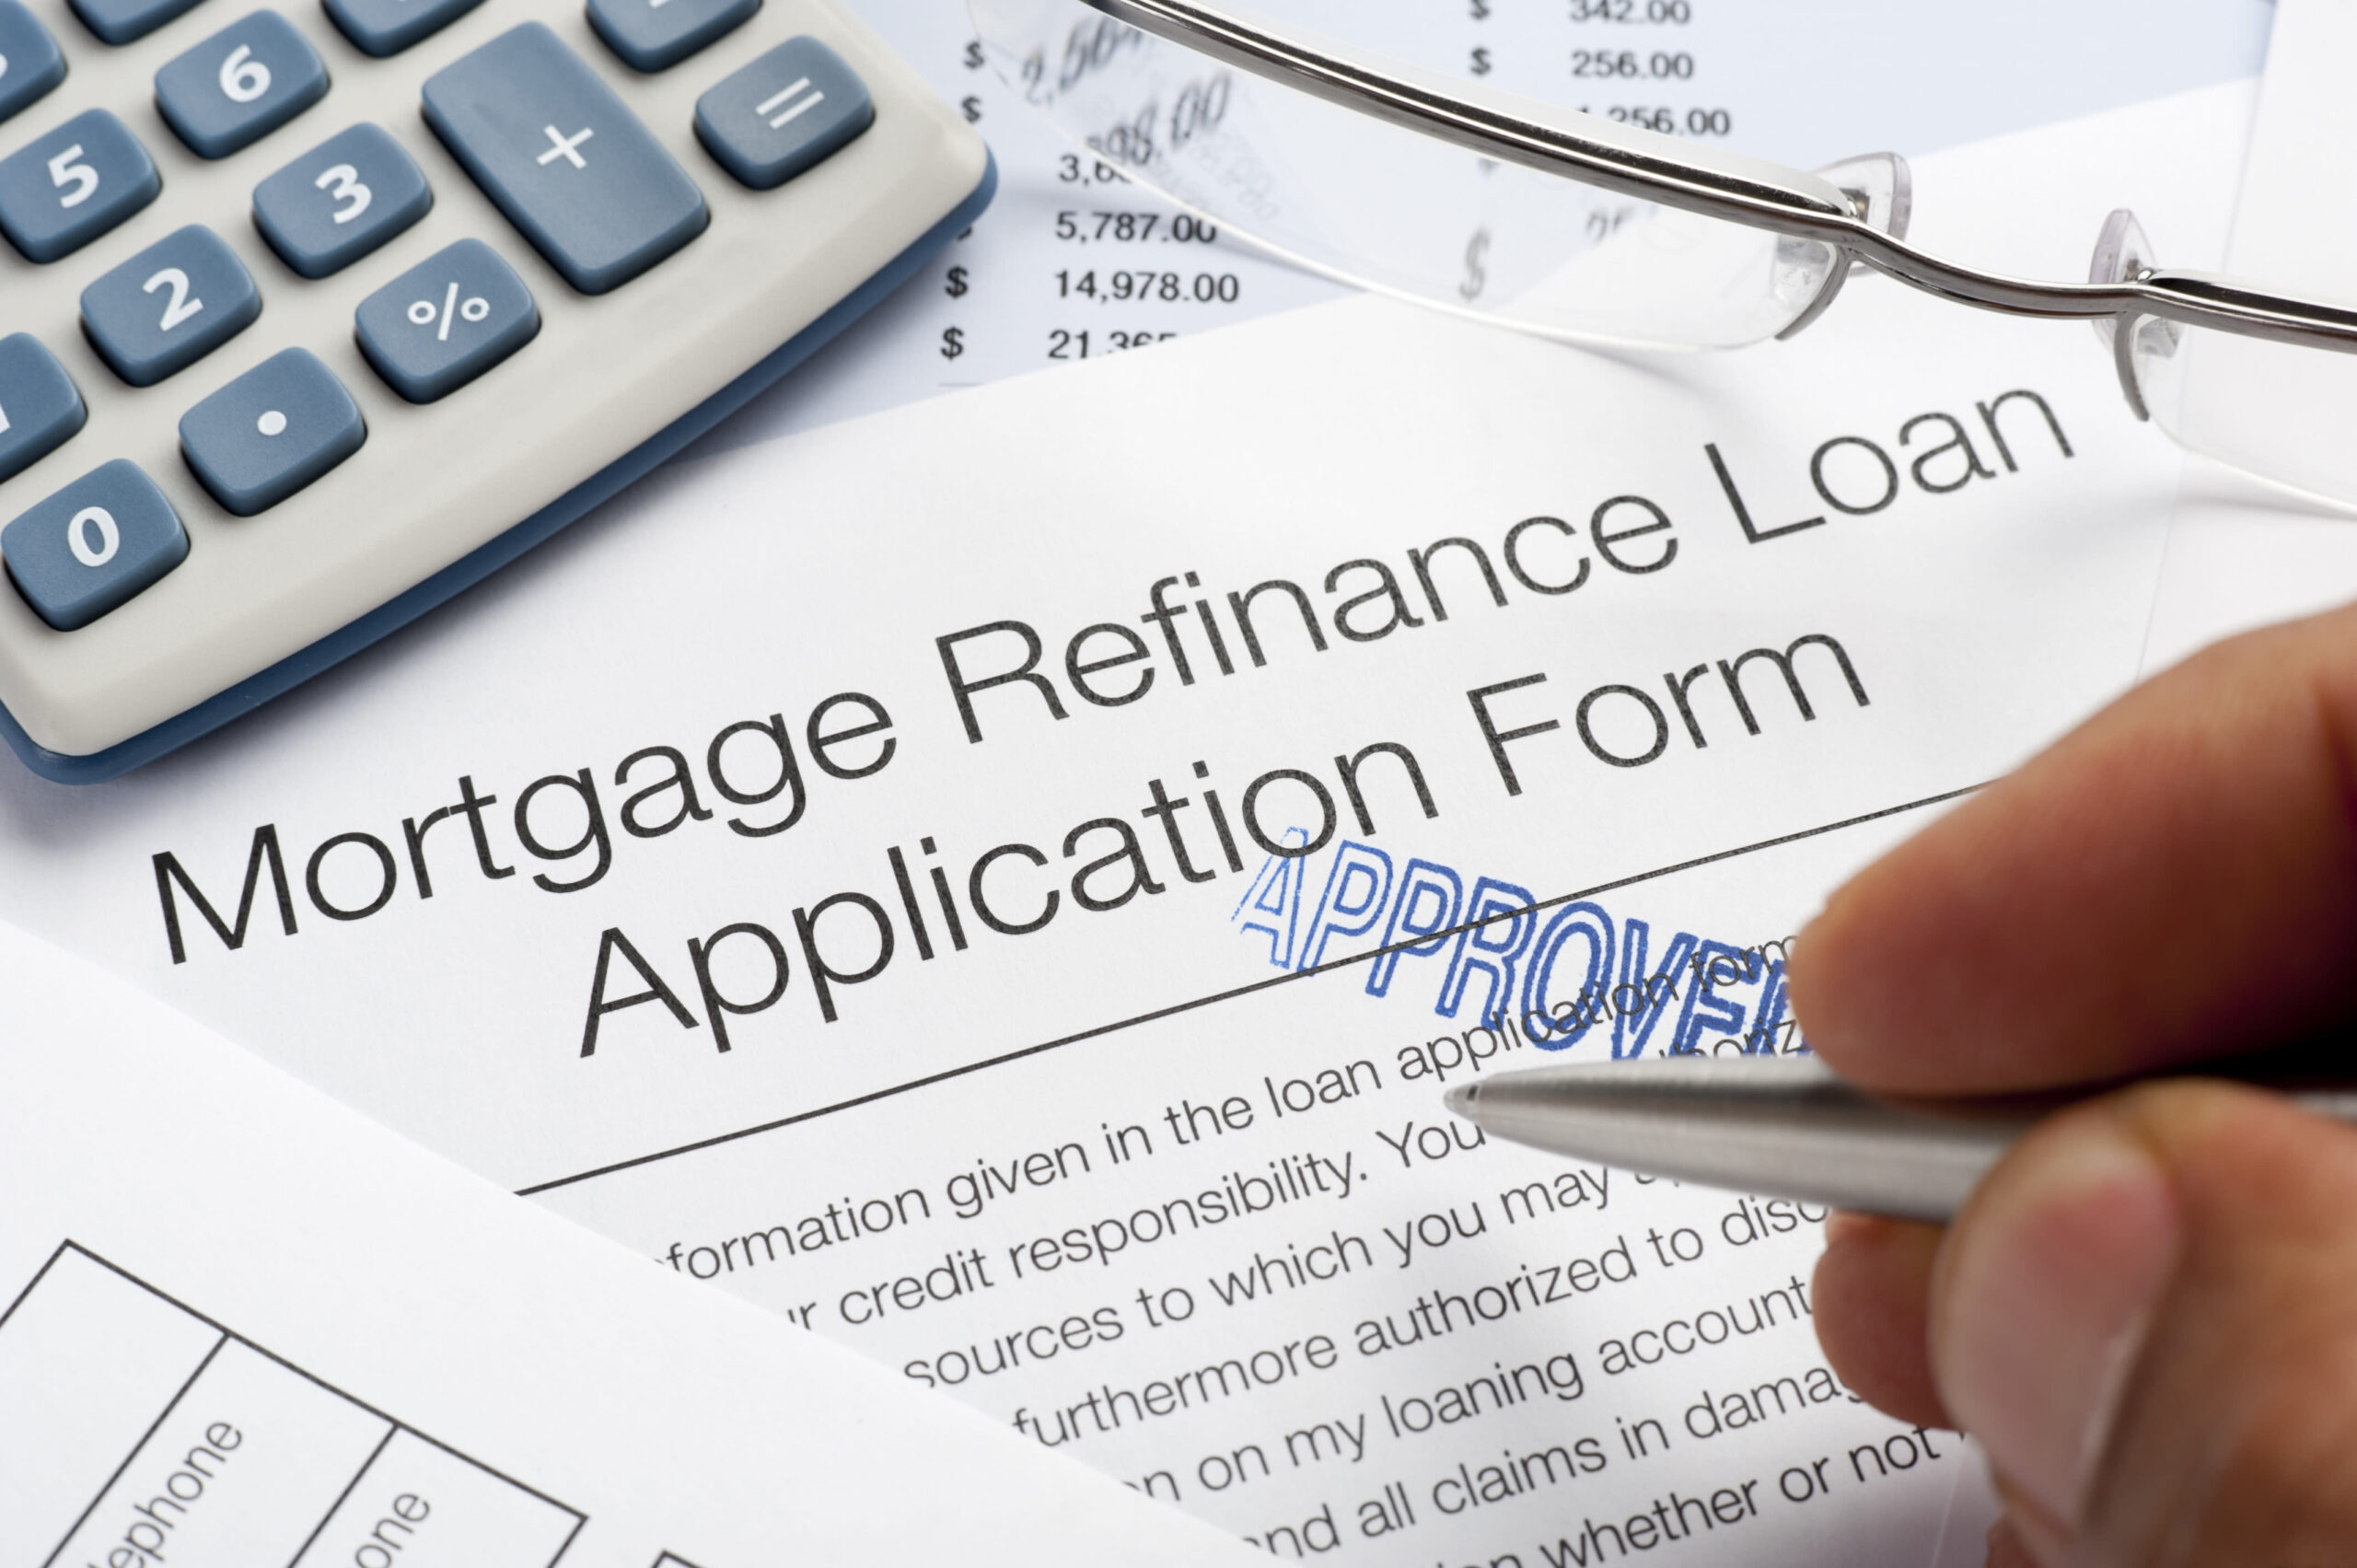 Refinancing a Mortgage with Bad Credit: What are Your Options?